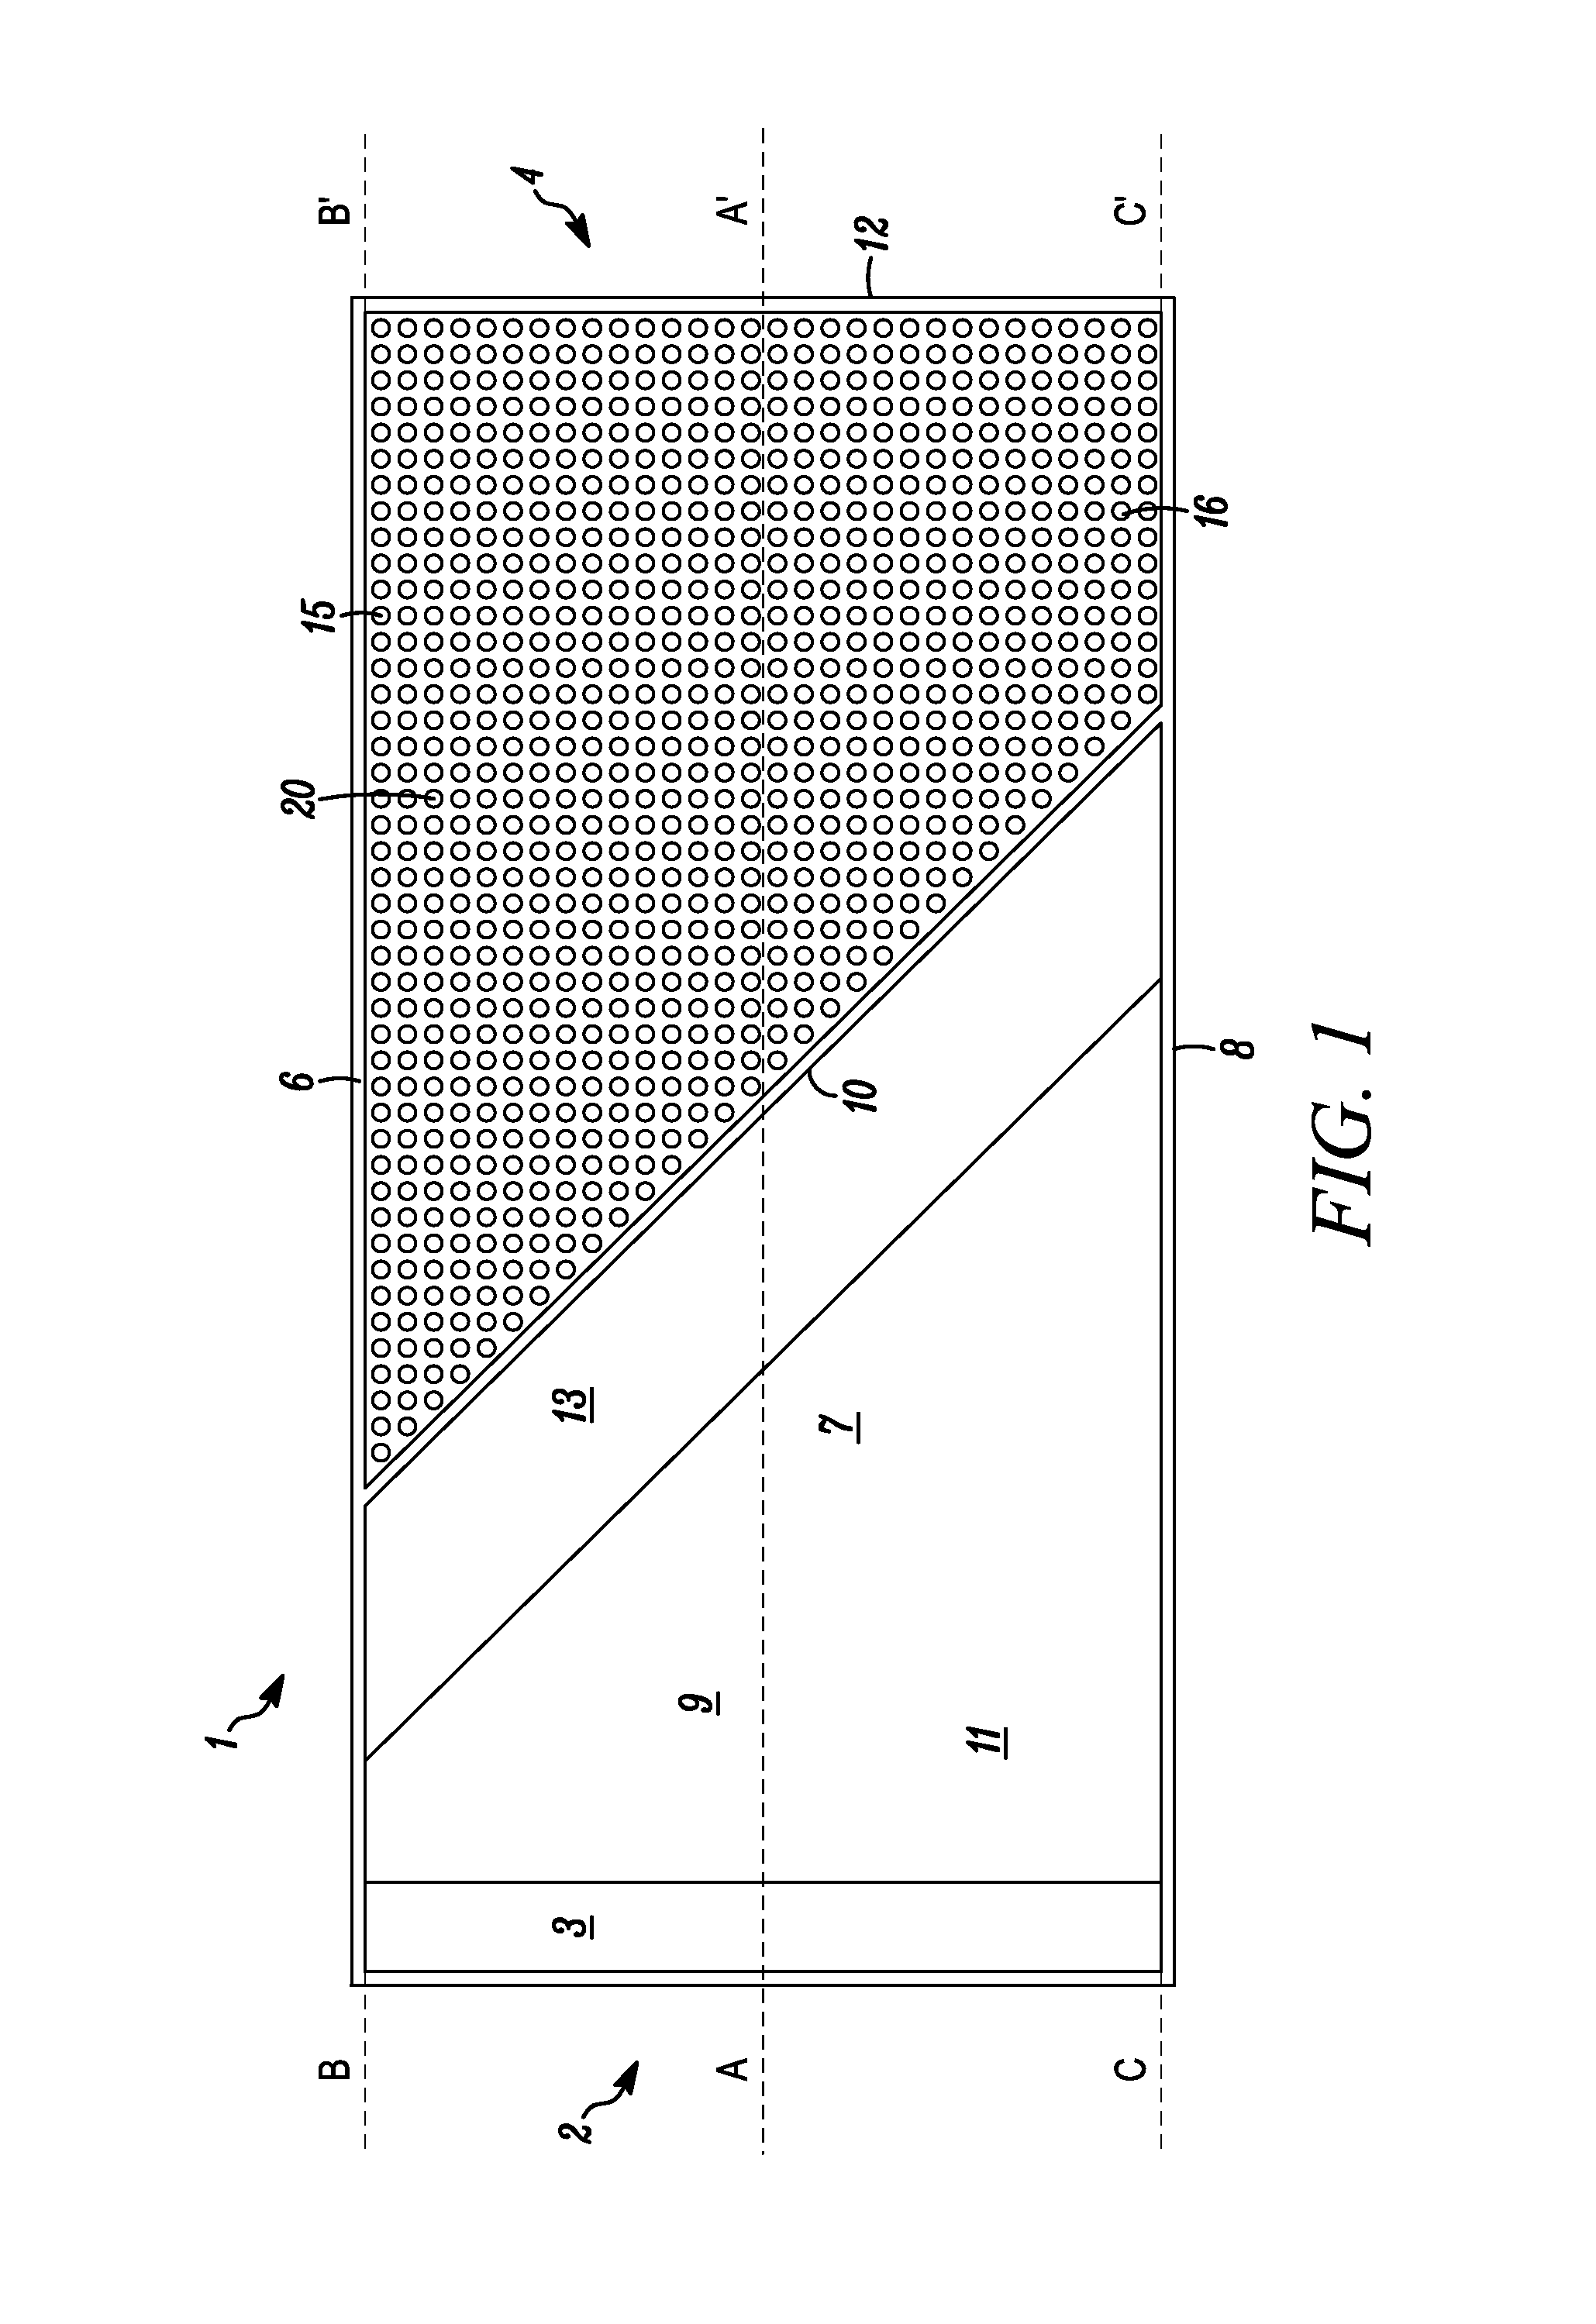 Method and apparatus for dampening waves in a wave pool